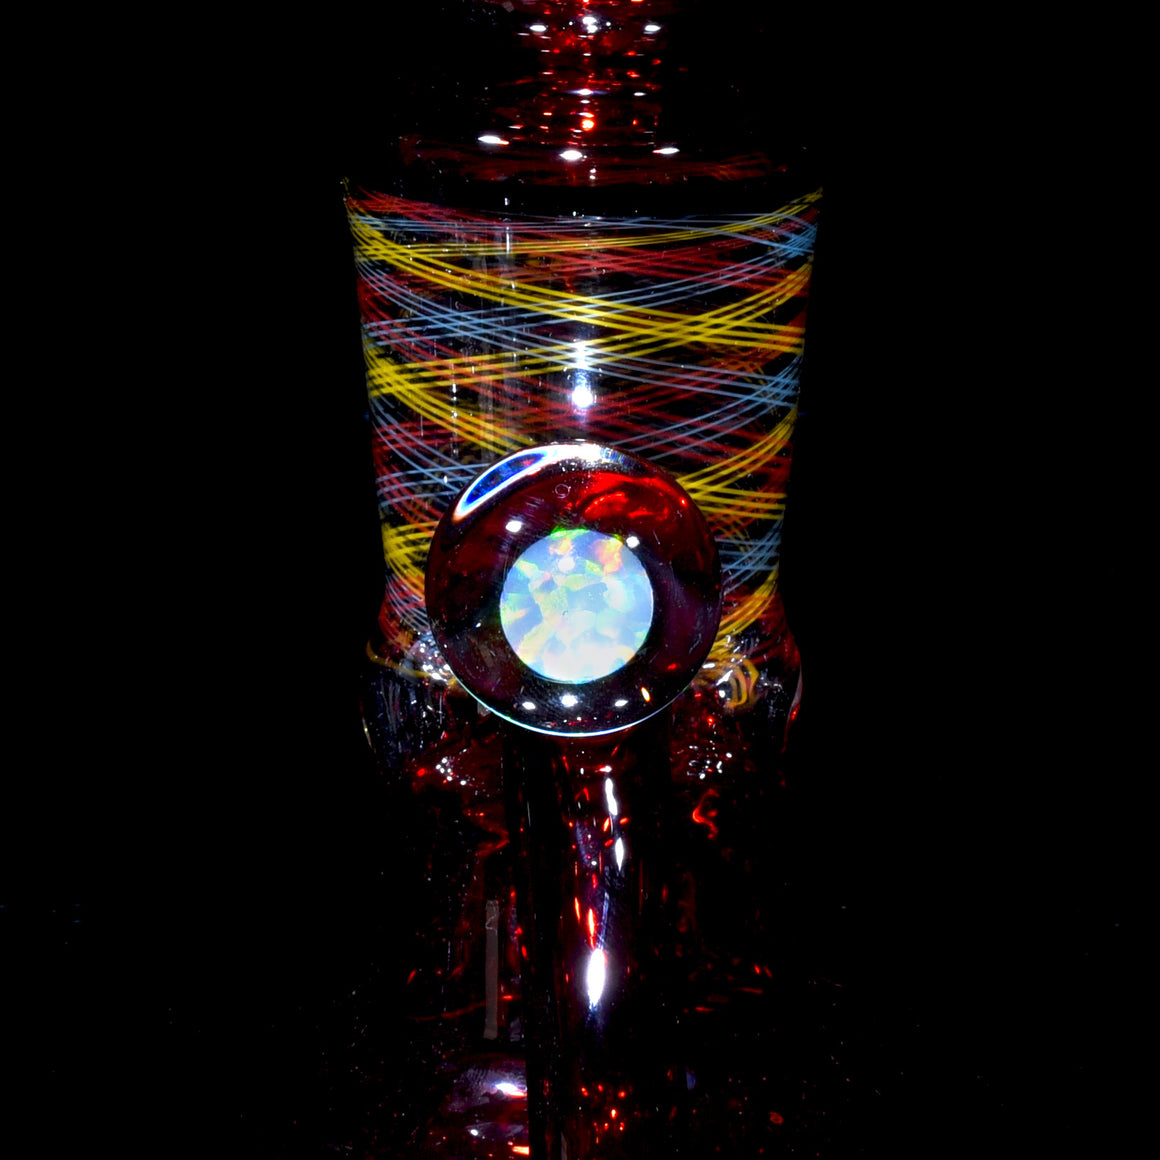 Fully-worked Blooper Recycler - Pomegranate/Rainbow Reti - 10mm Female